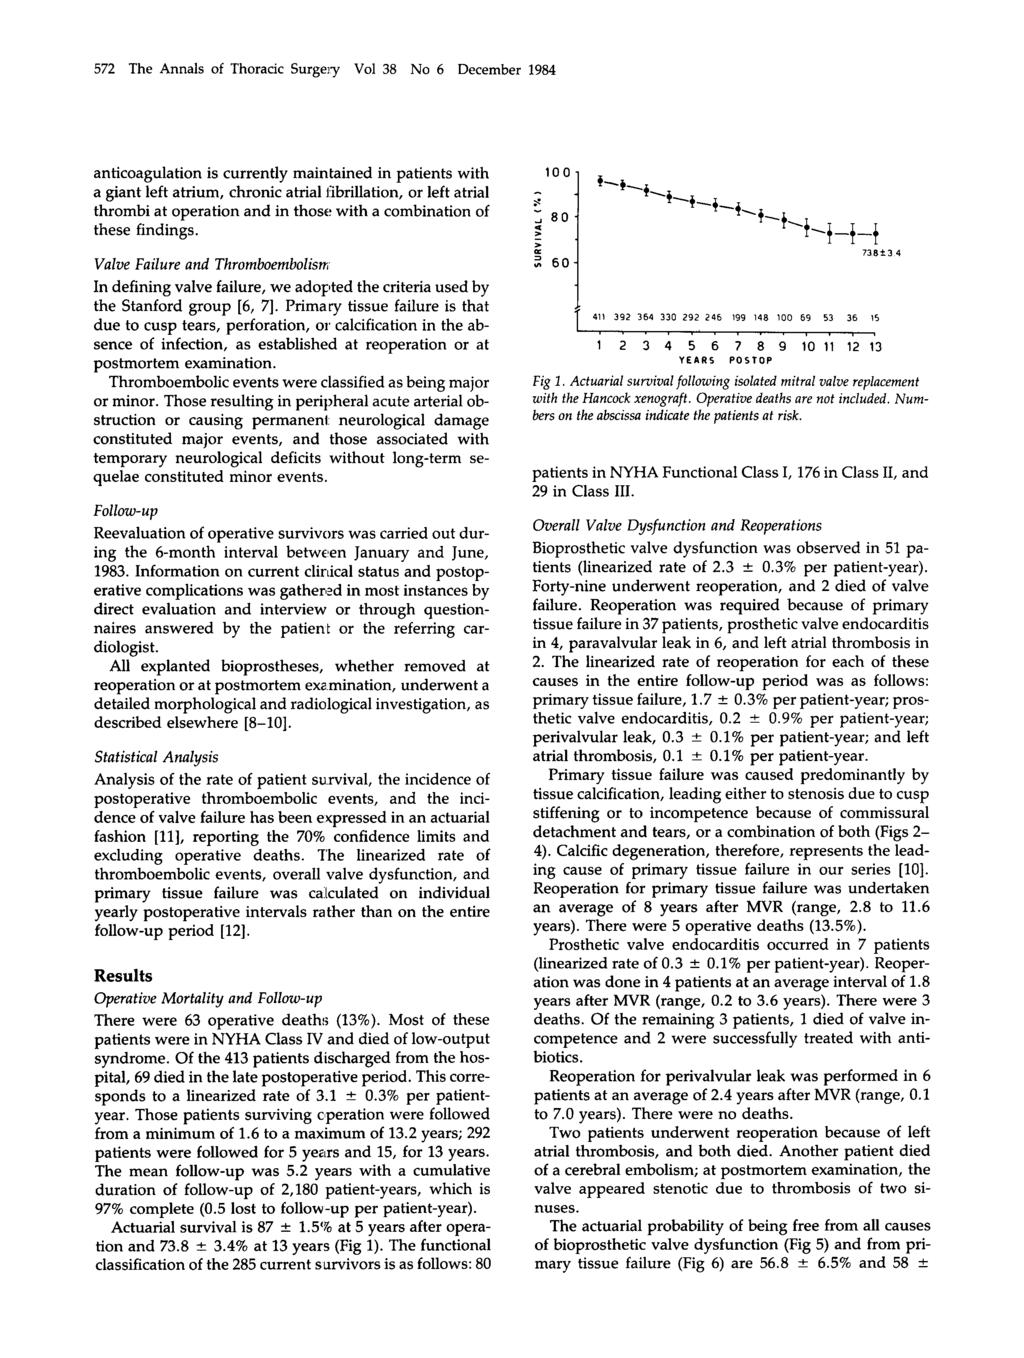 572 The Annals of Thoracic Surgery Vol 38 No 6 December 1984 anticoagulation is currently maintained in patients with a giant left atrium, chronic atrial fibrillation, or left atrial thrombi at